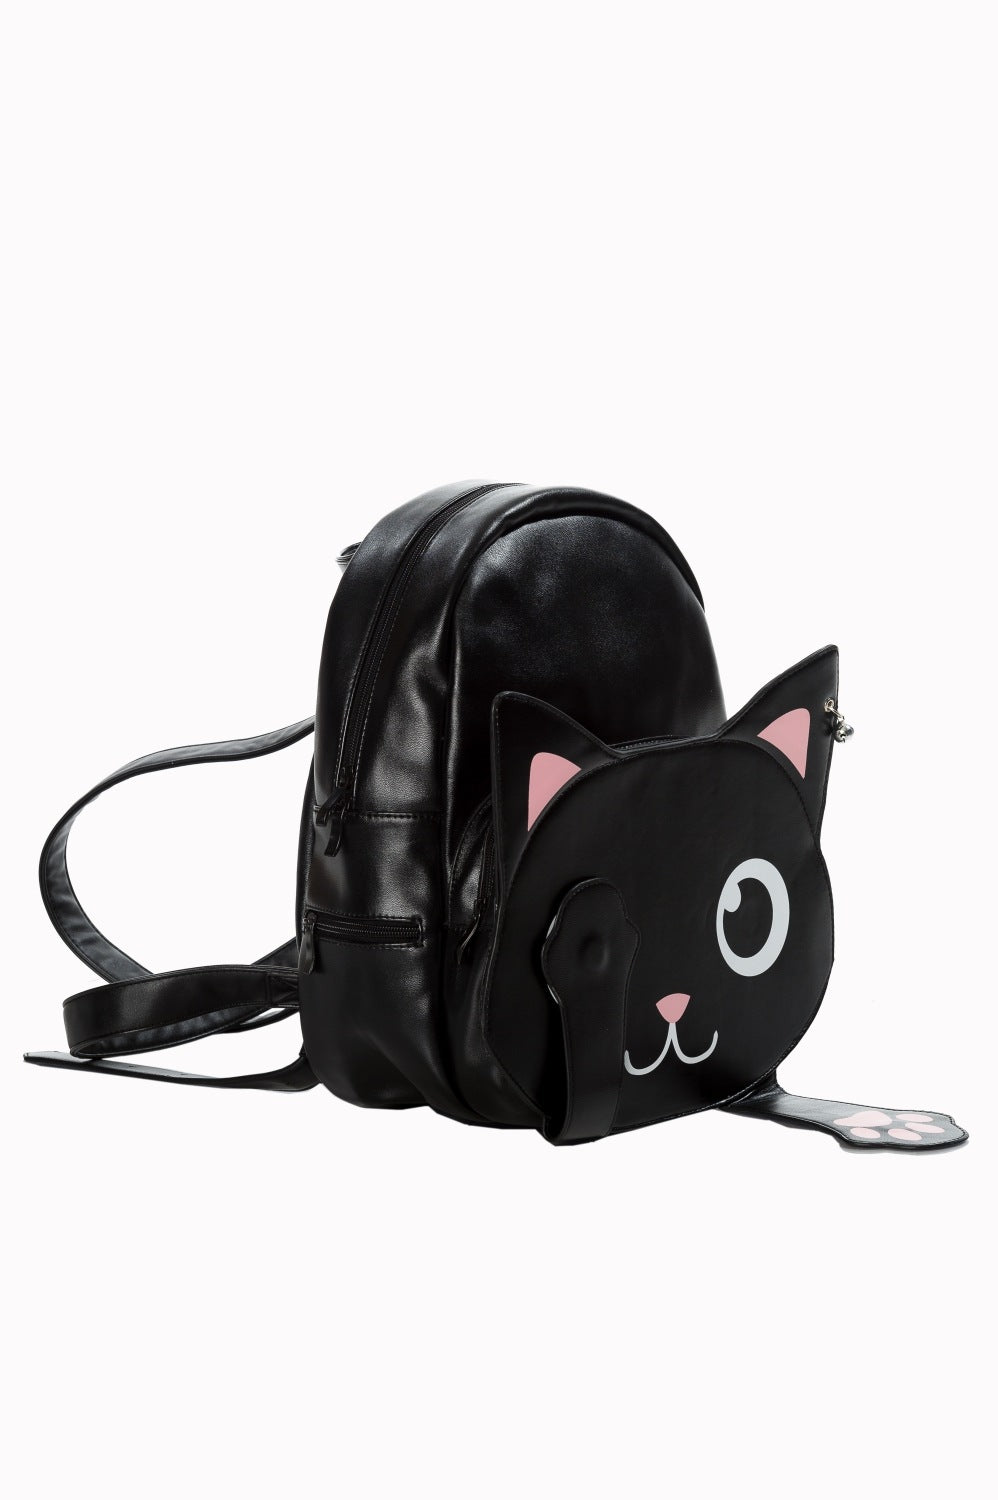 Side view on cat face back pack with one paw hiding one eye